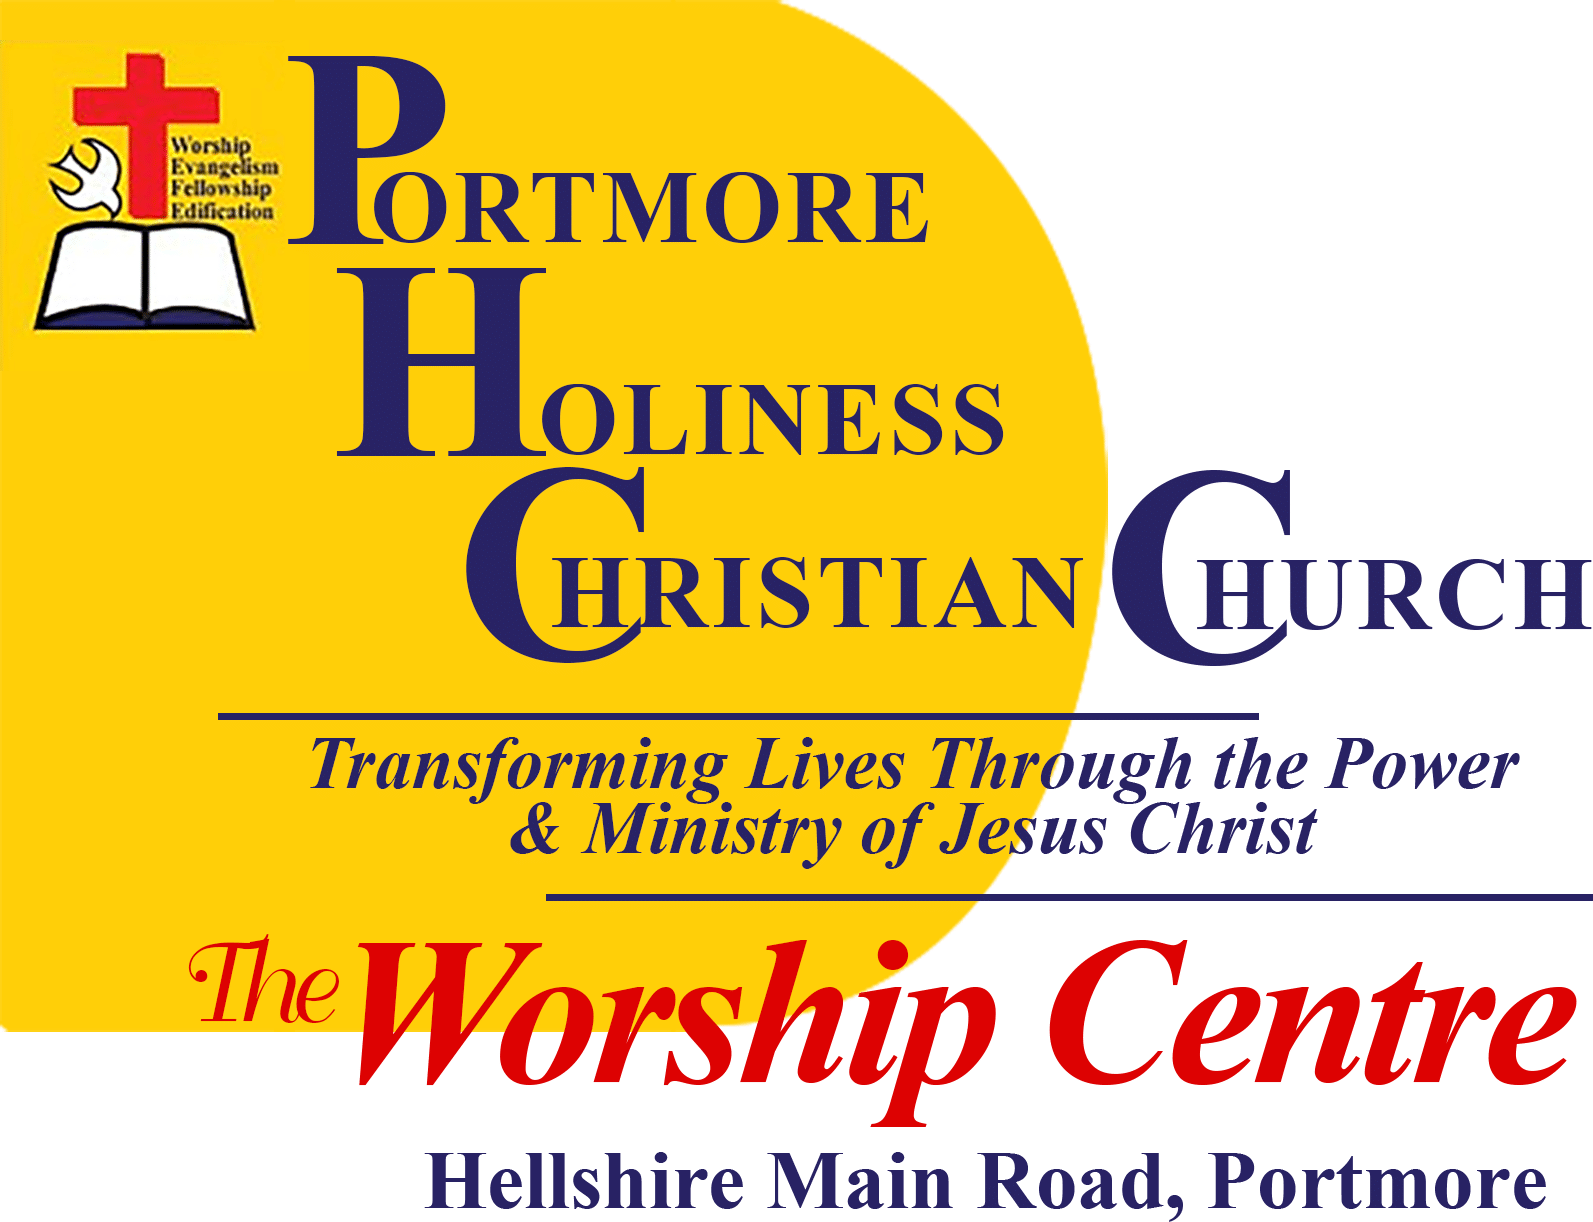 The Portmore Holiness Christian Church (PHCC)